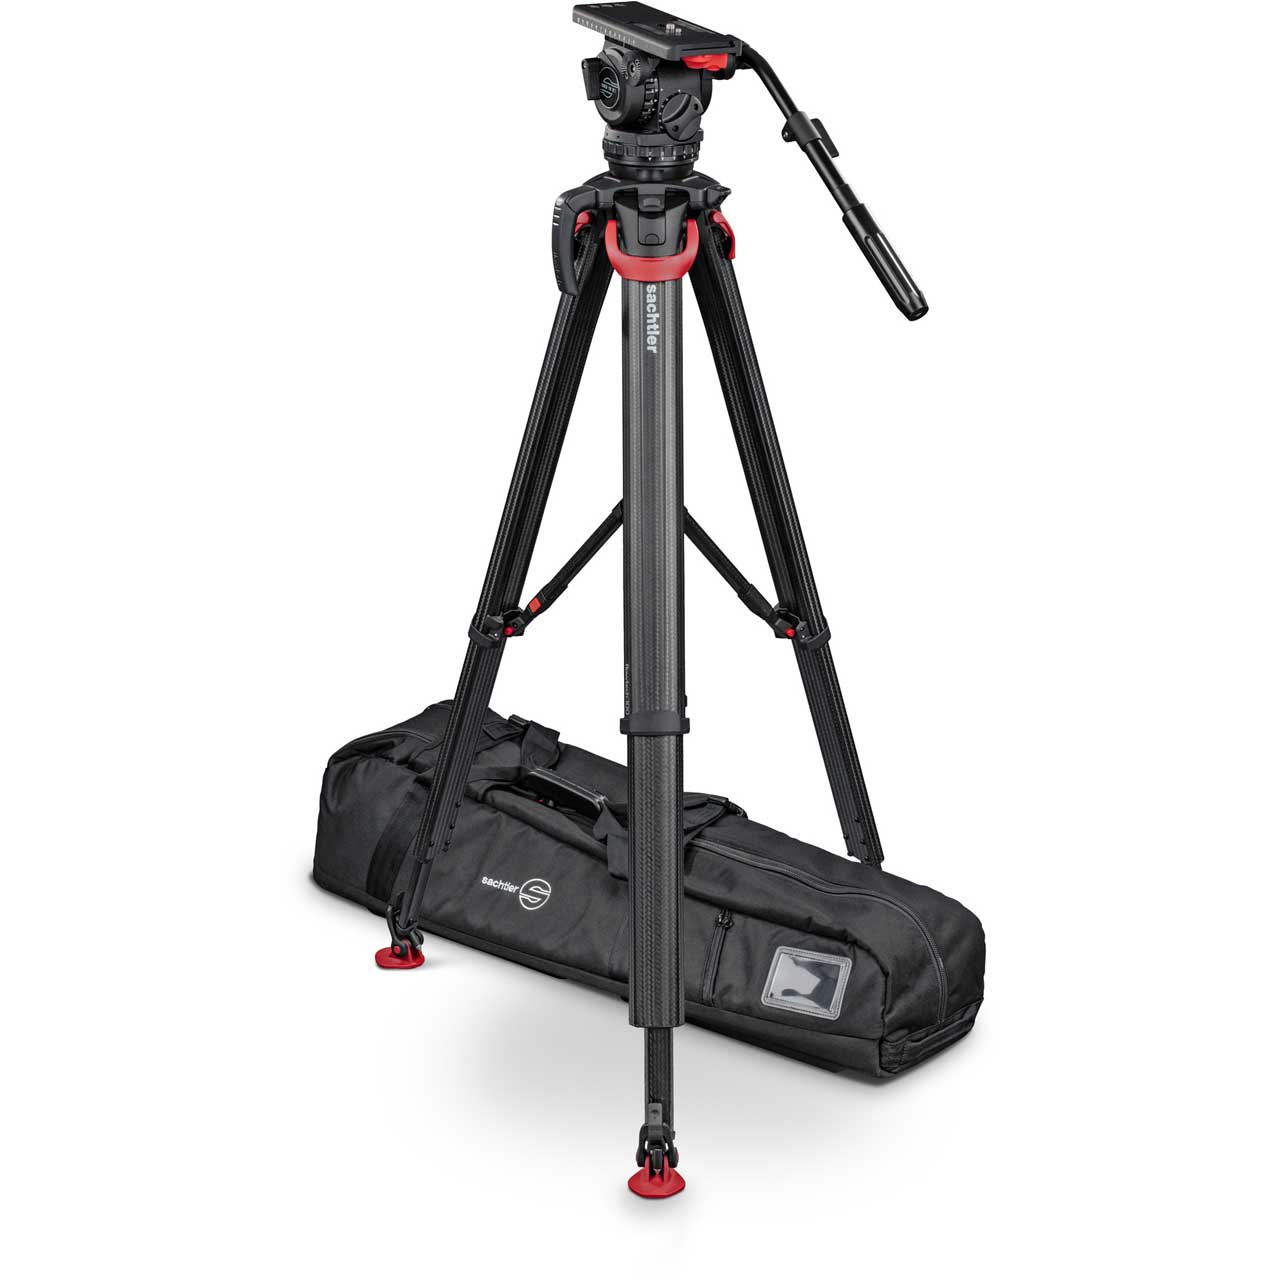 Sachtler System Video 18 Fluid Head (1811) Tripod Flowtech 100 MS with Mid -Level Spreader and Rubber Feet